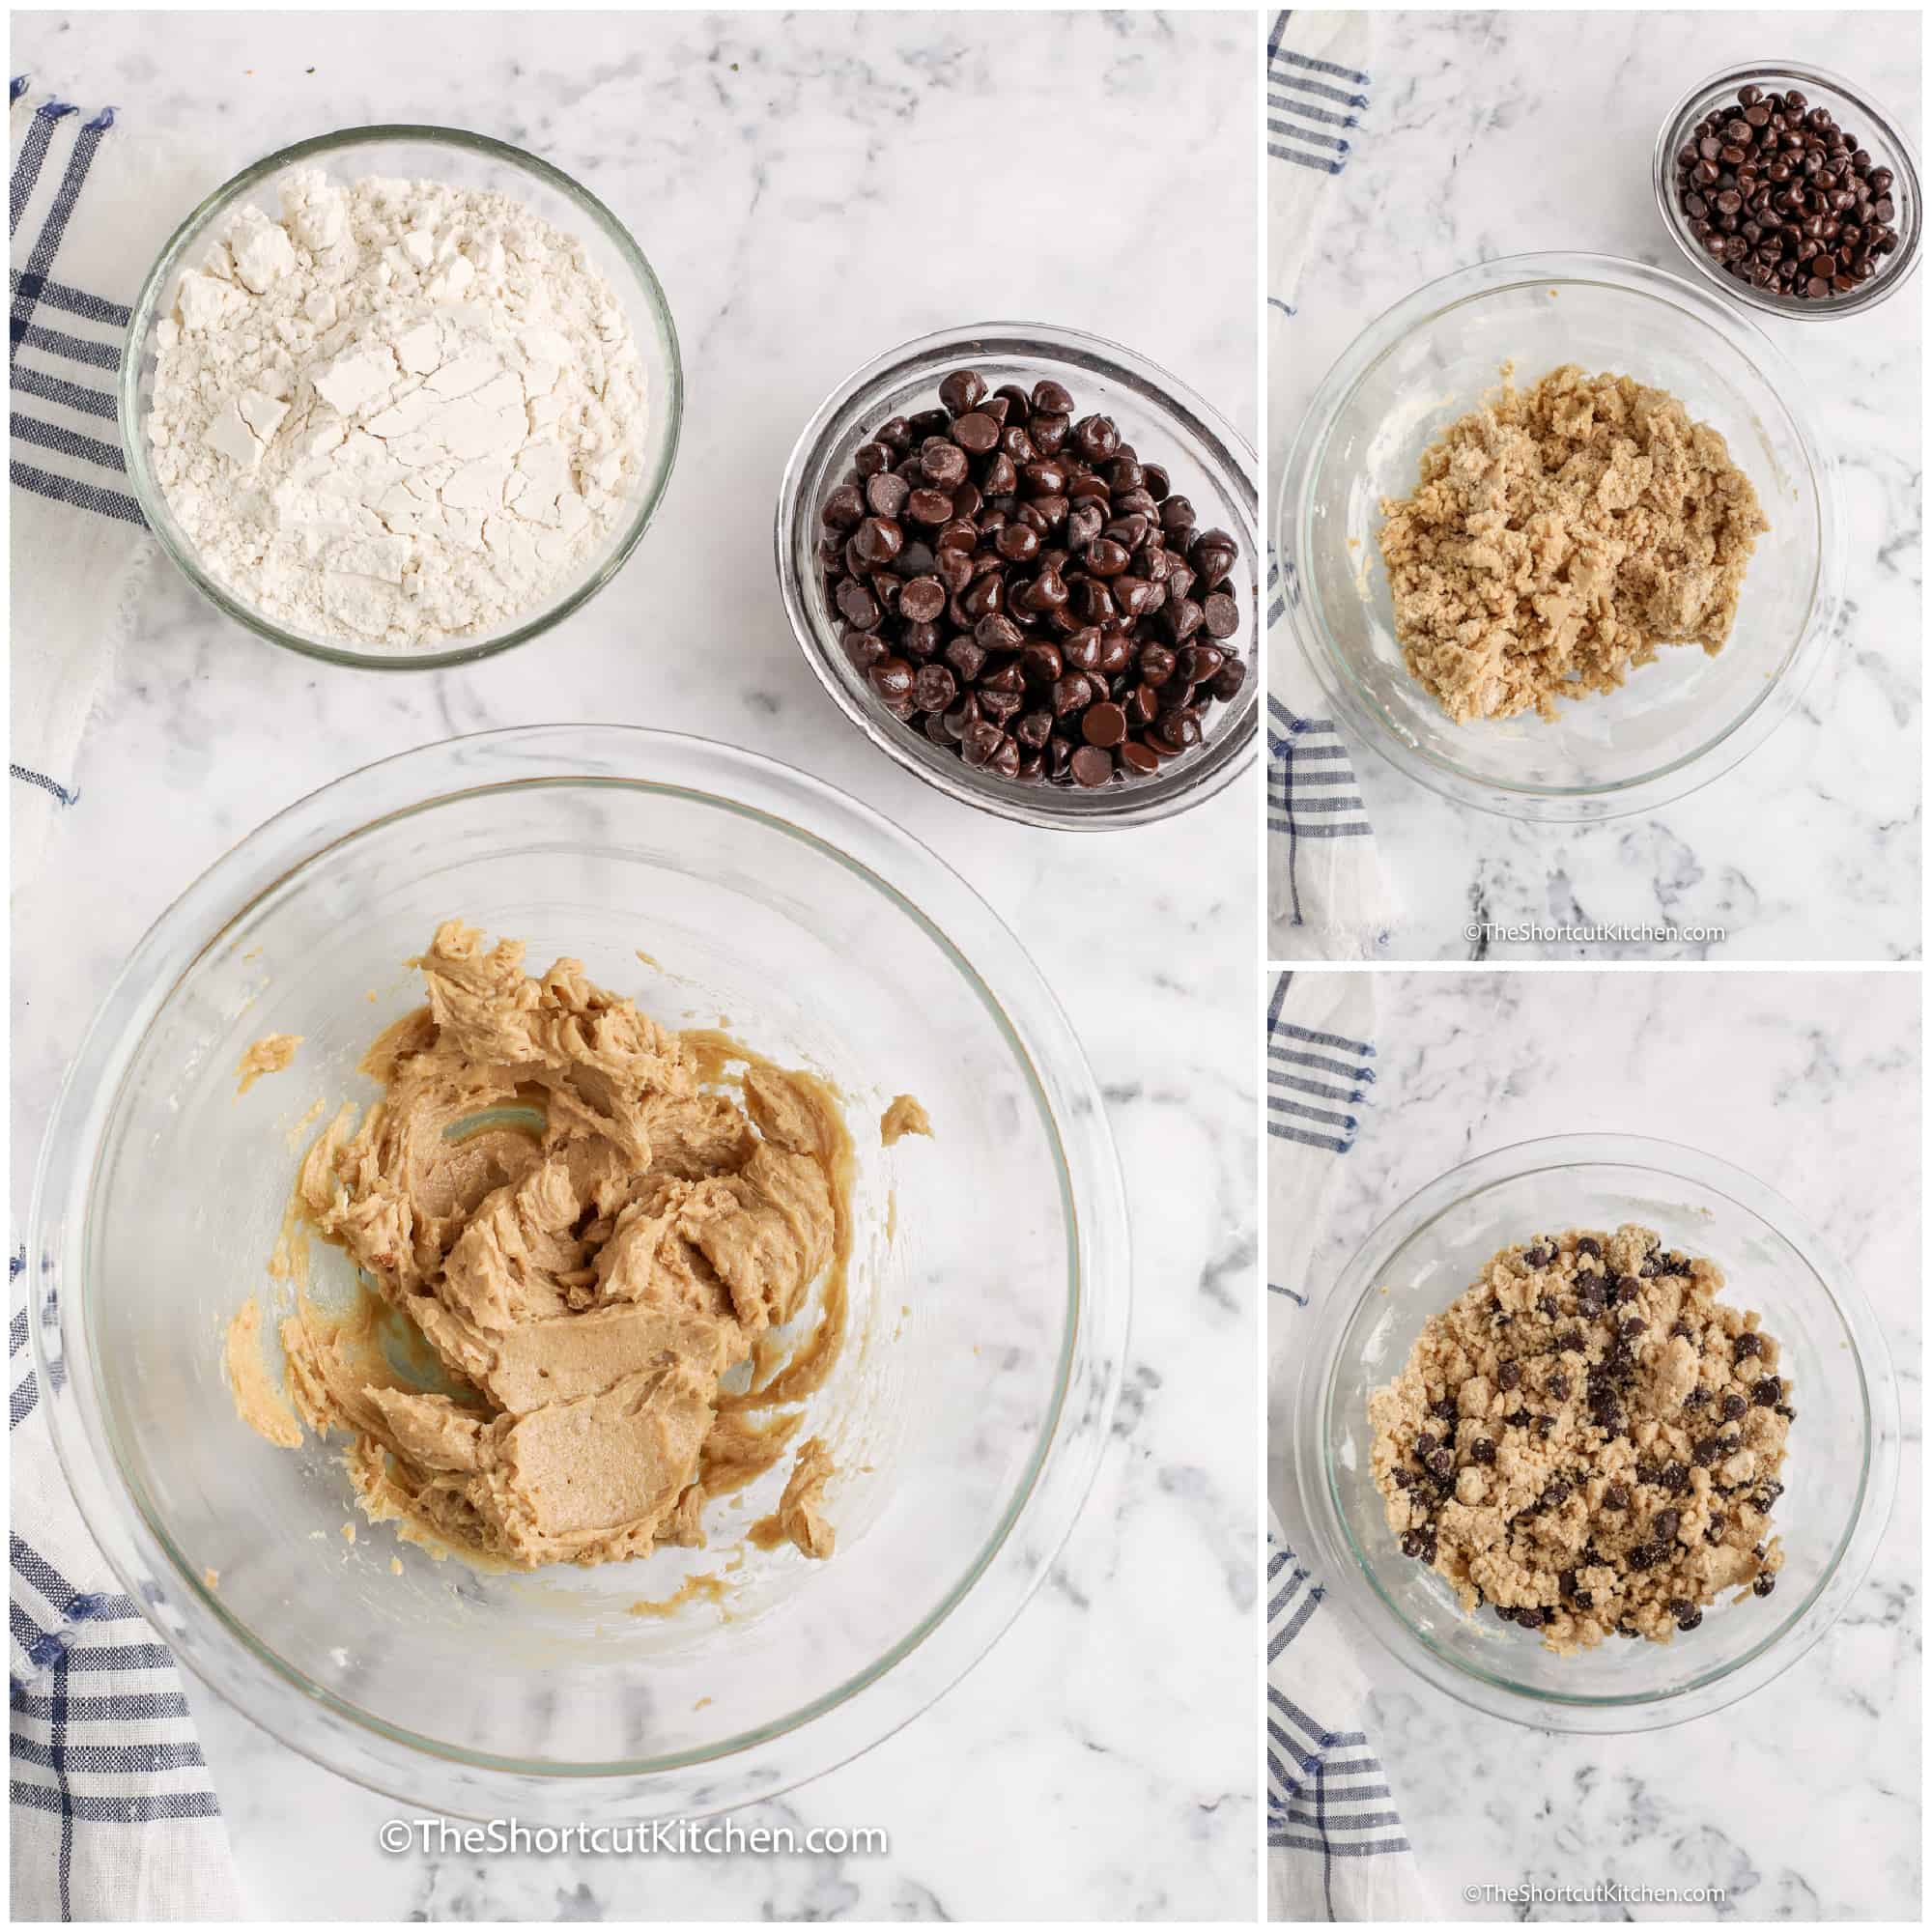 process of mixing chocolate chip cookie dough